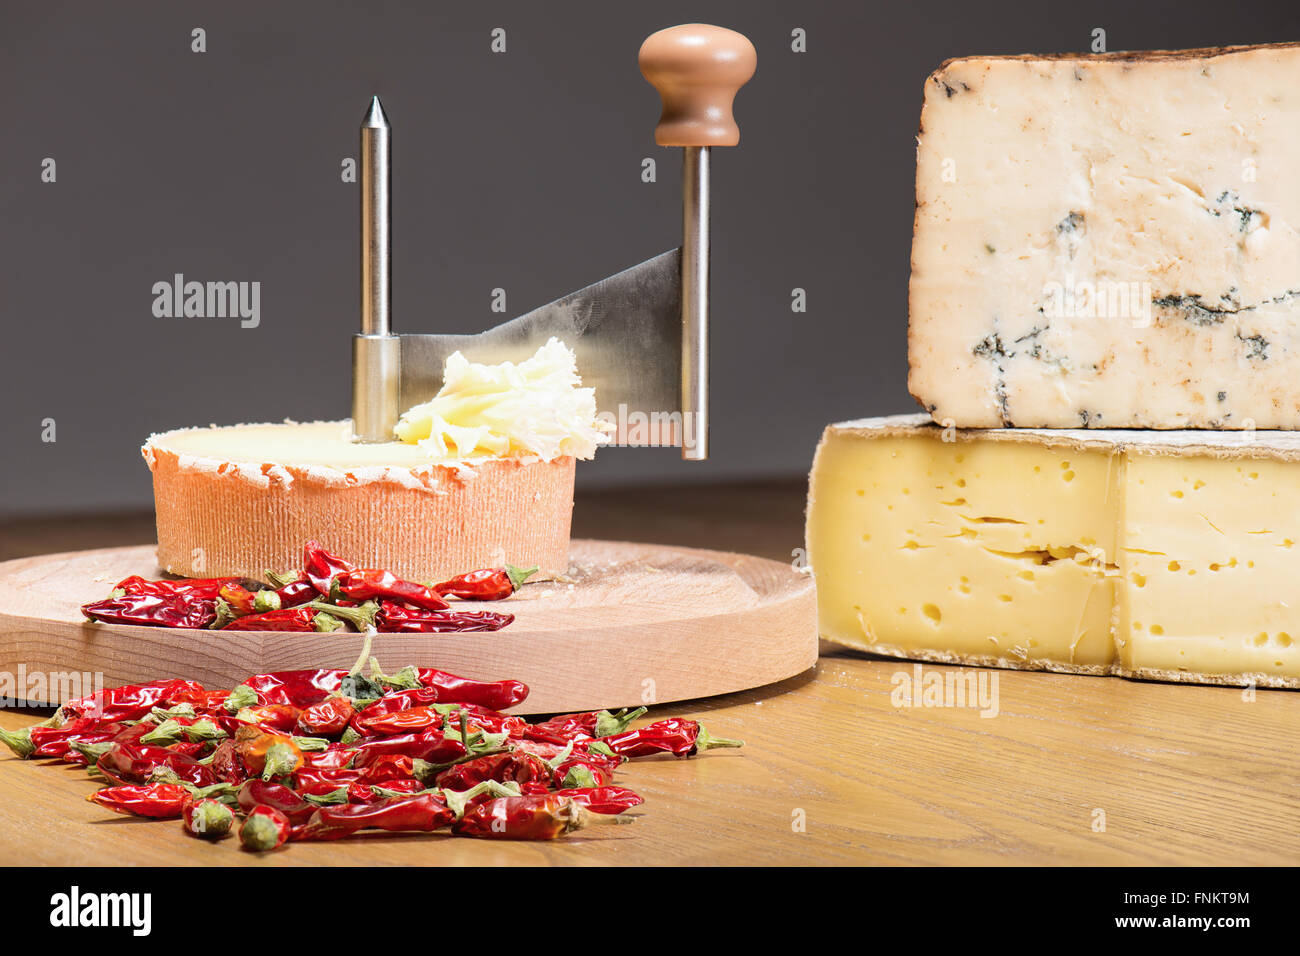 italian cilento cheese with manual machine for cutting on wood table Stock Photo